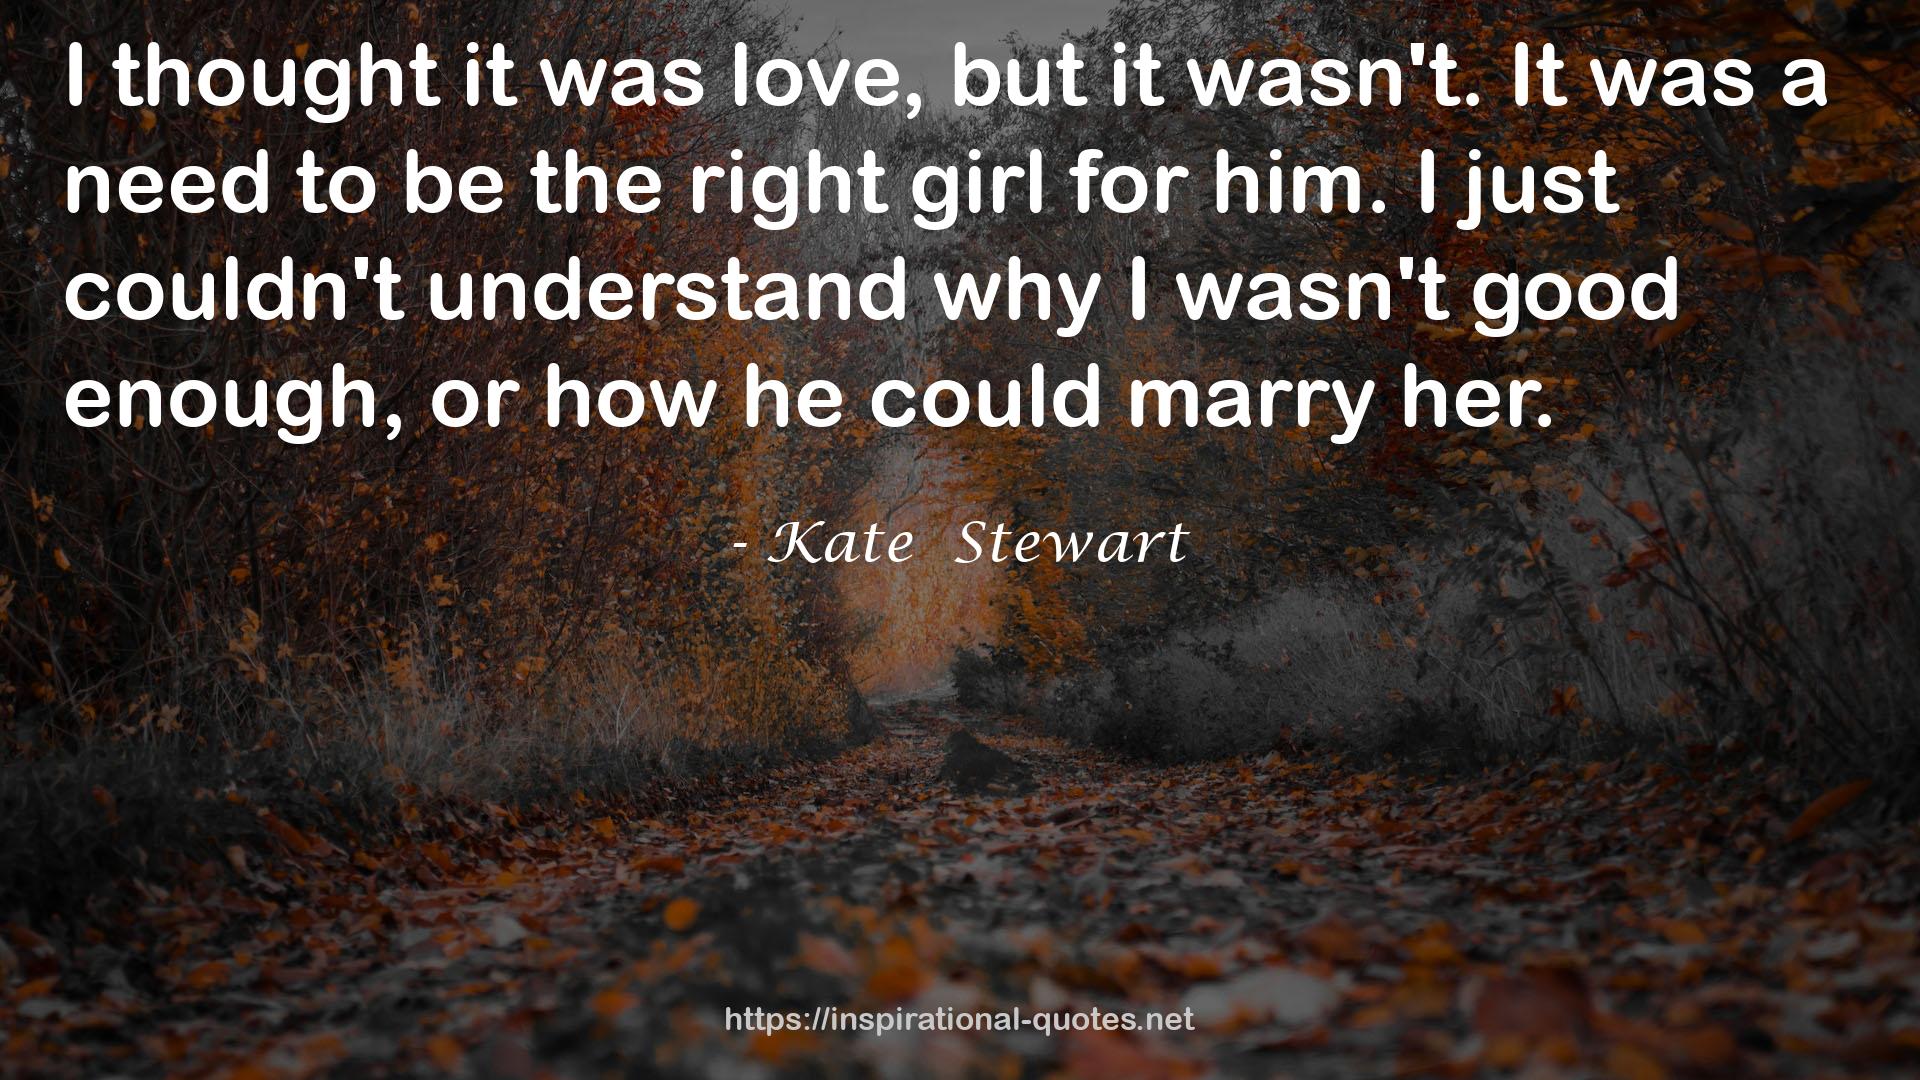 Kate  Stewart QUOTES